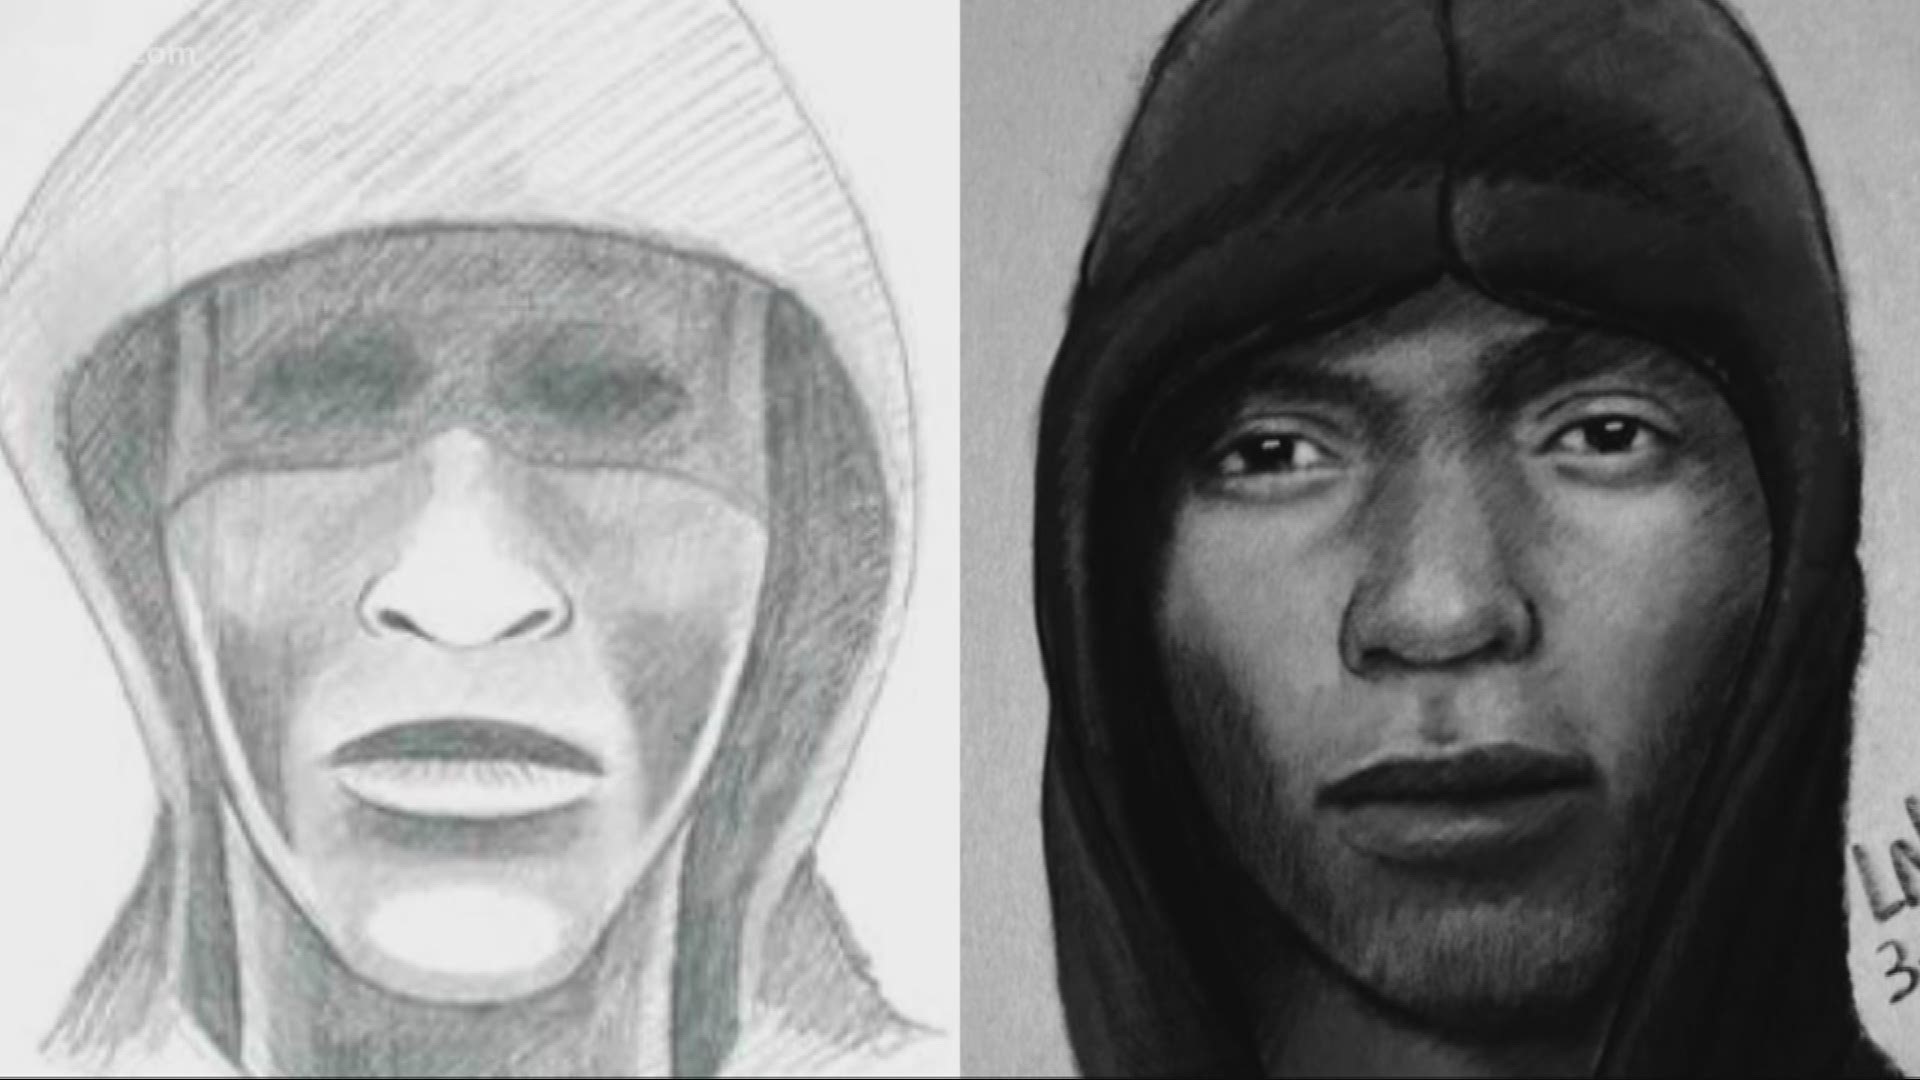 Investigators believe the man is responsible for several crimes, including breaking into a woman's apartment and sexually assaulting her.